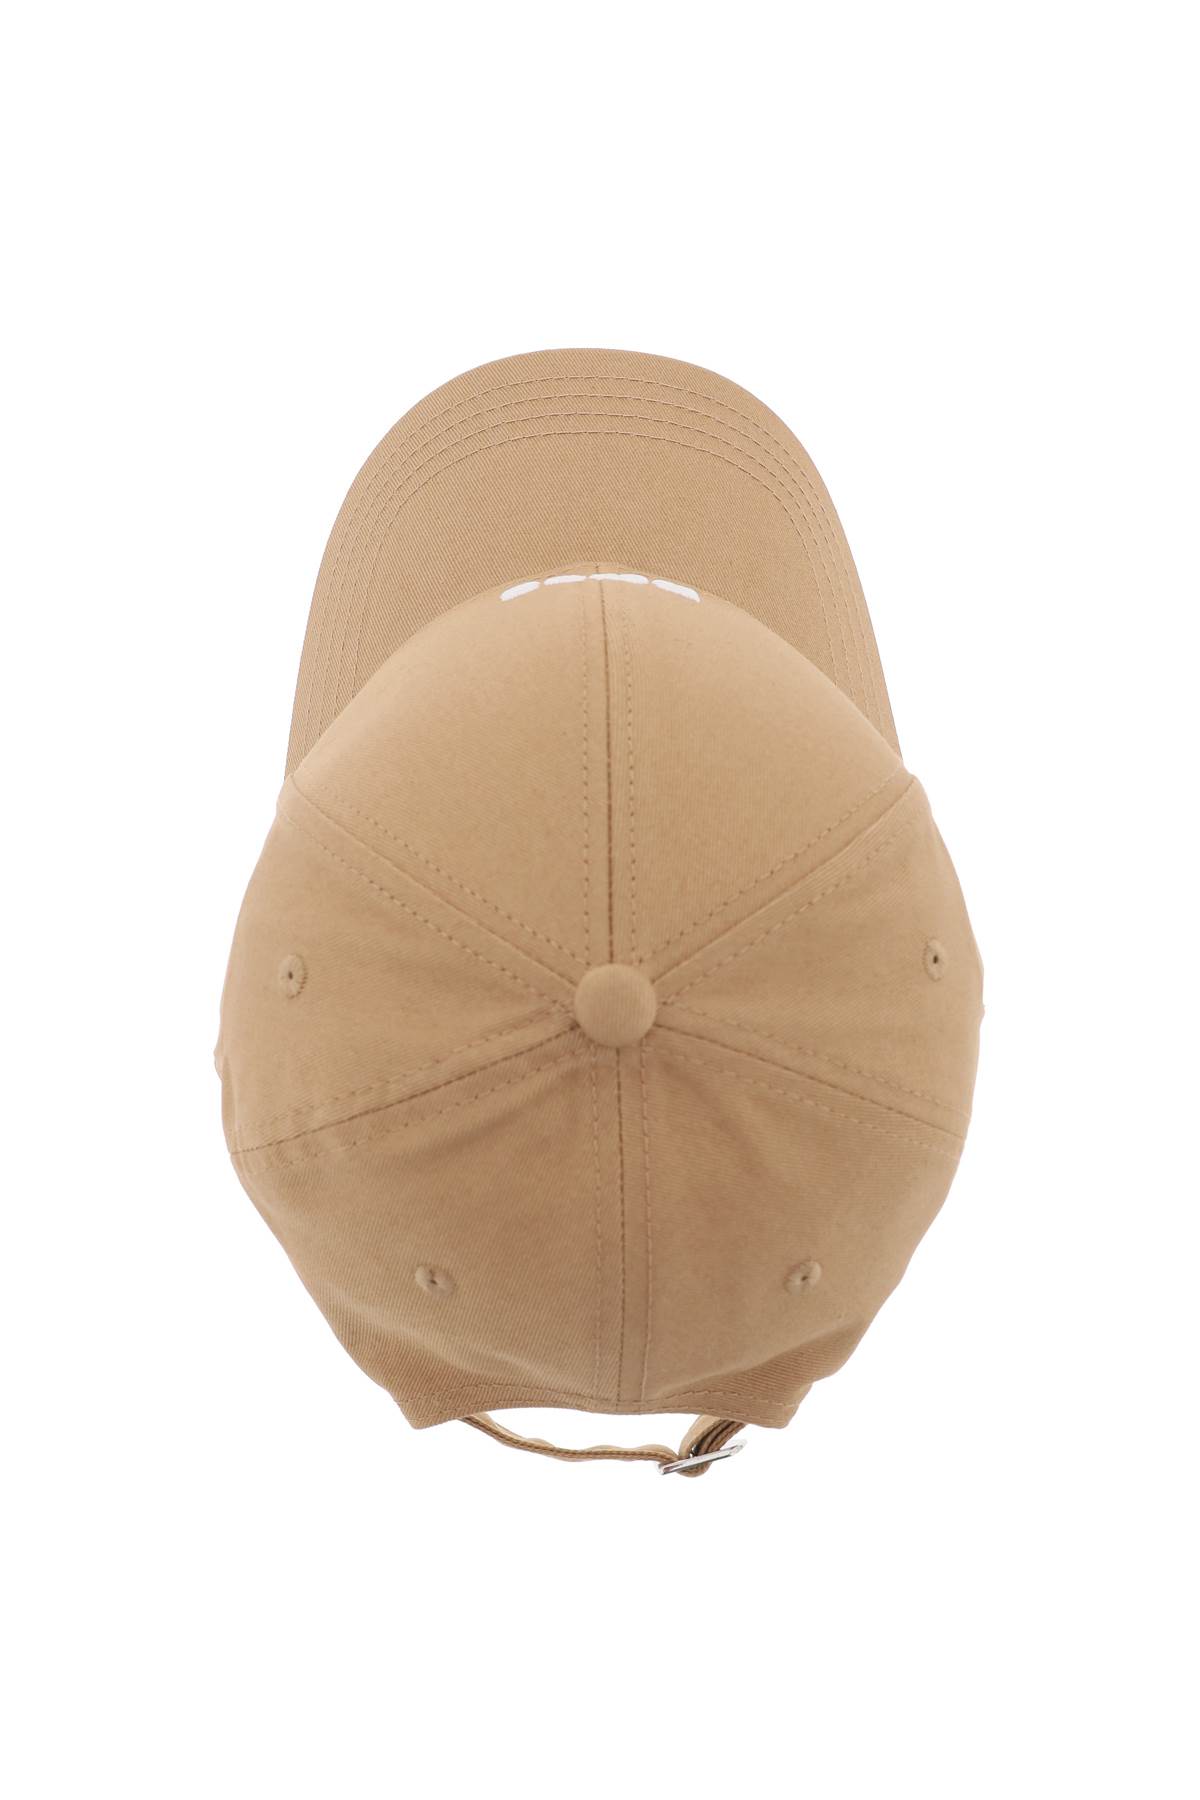 Shop Hugo Boss Baseball Cap With Embroidered Logo In Beige